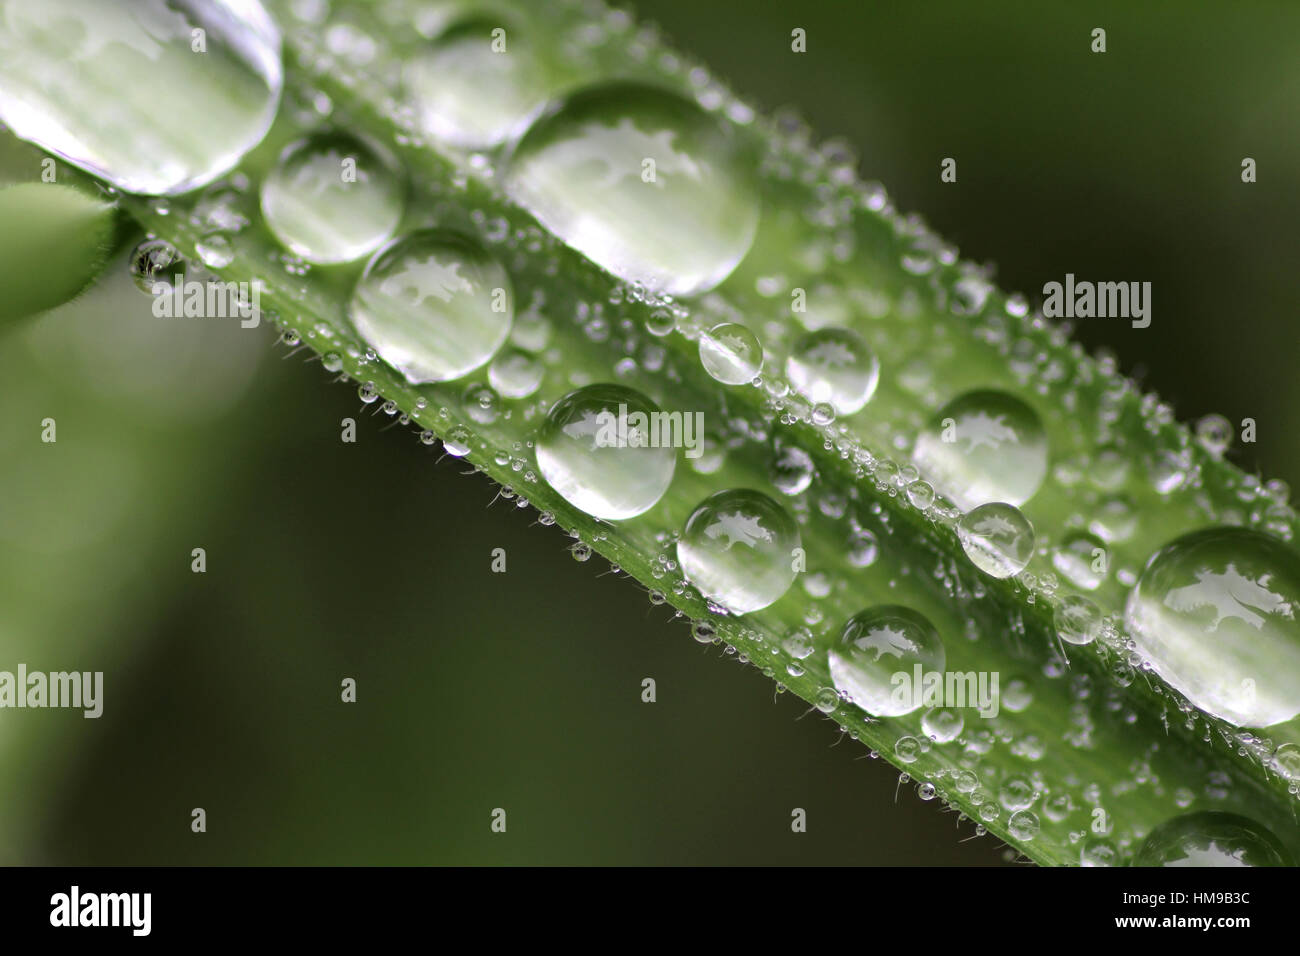 Small droplets of rain on a blade of grass close up on a green background Stock Photo